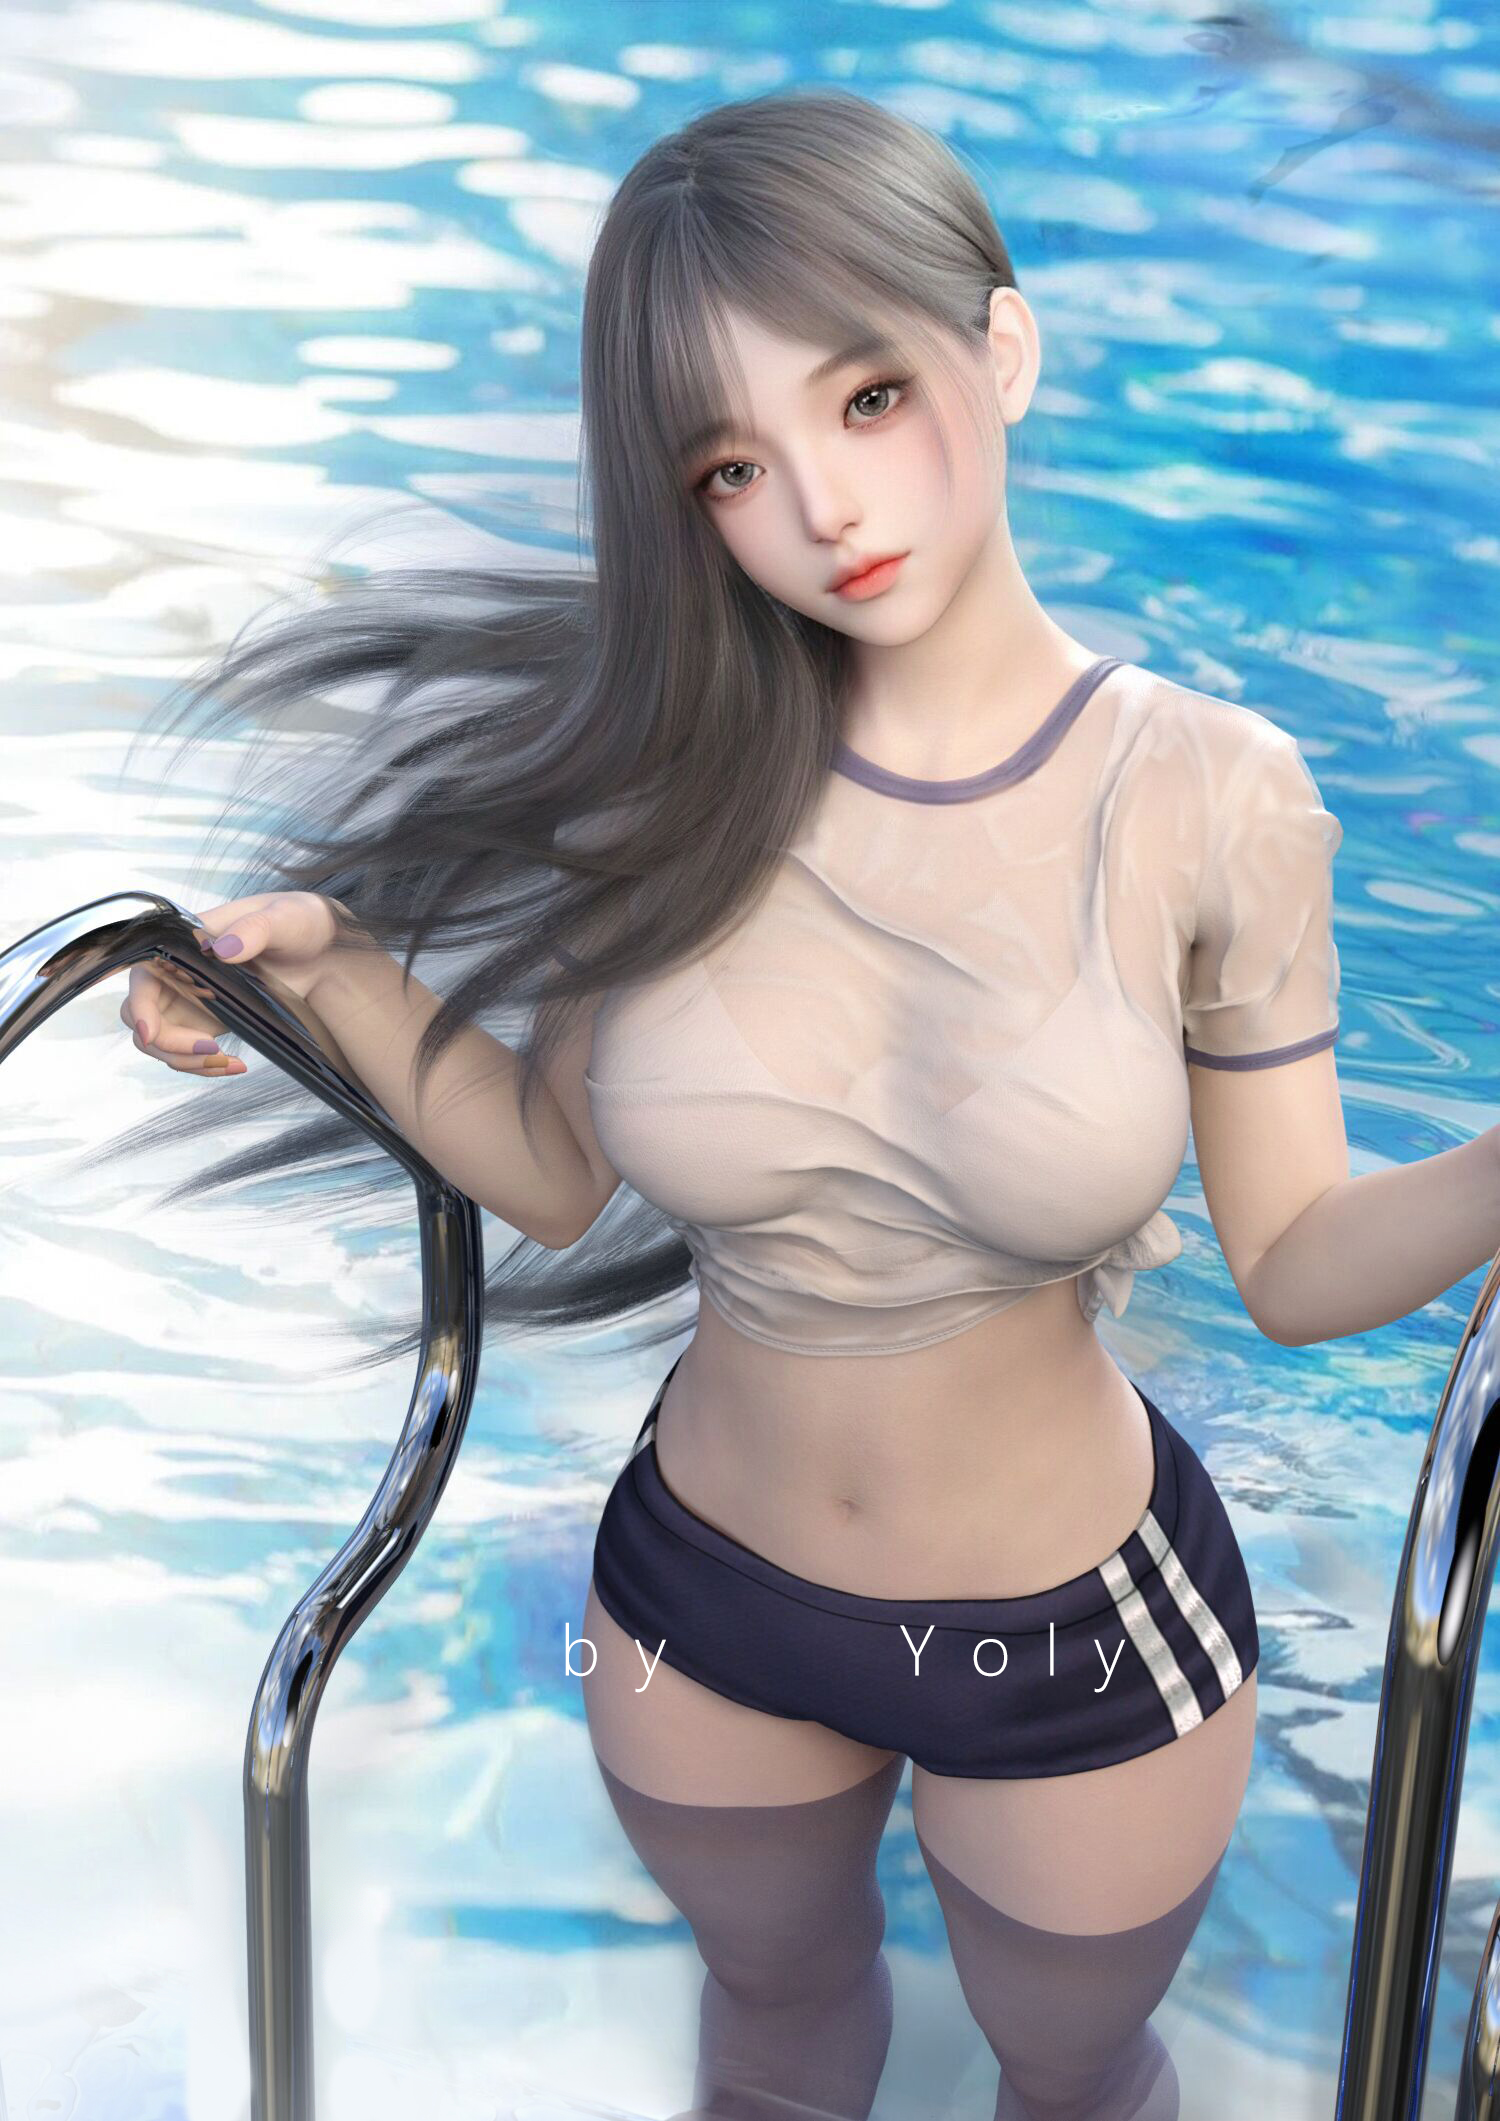 General 1500x2121 Yoly Asian swimming pool CGI digital art women standing in water water gym clothes